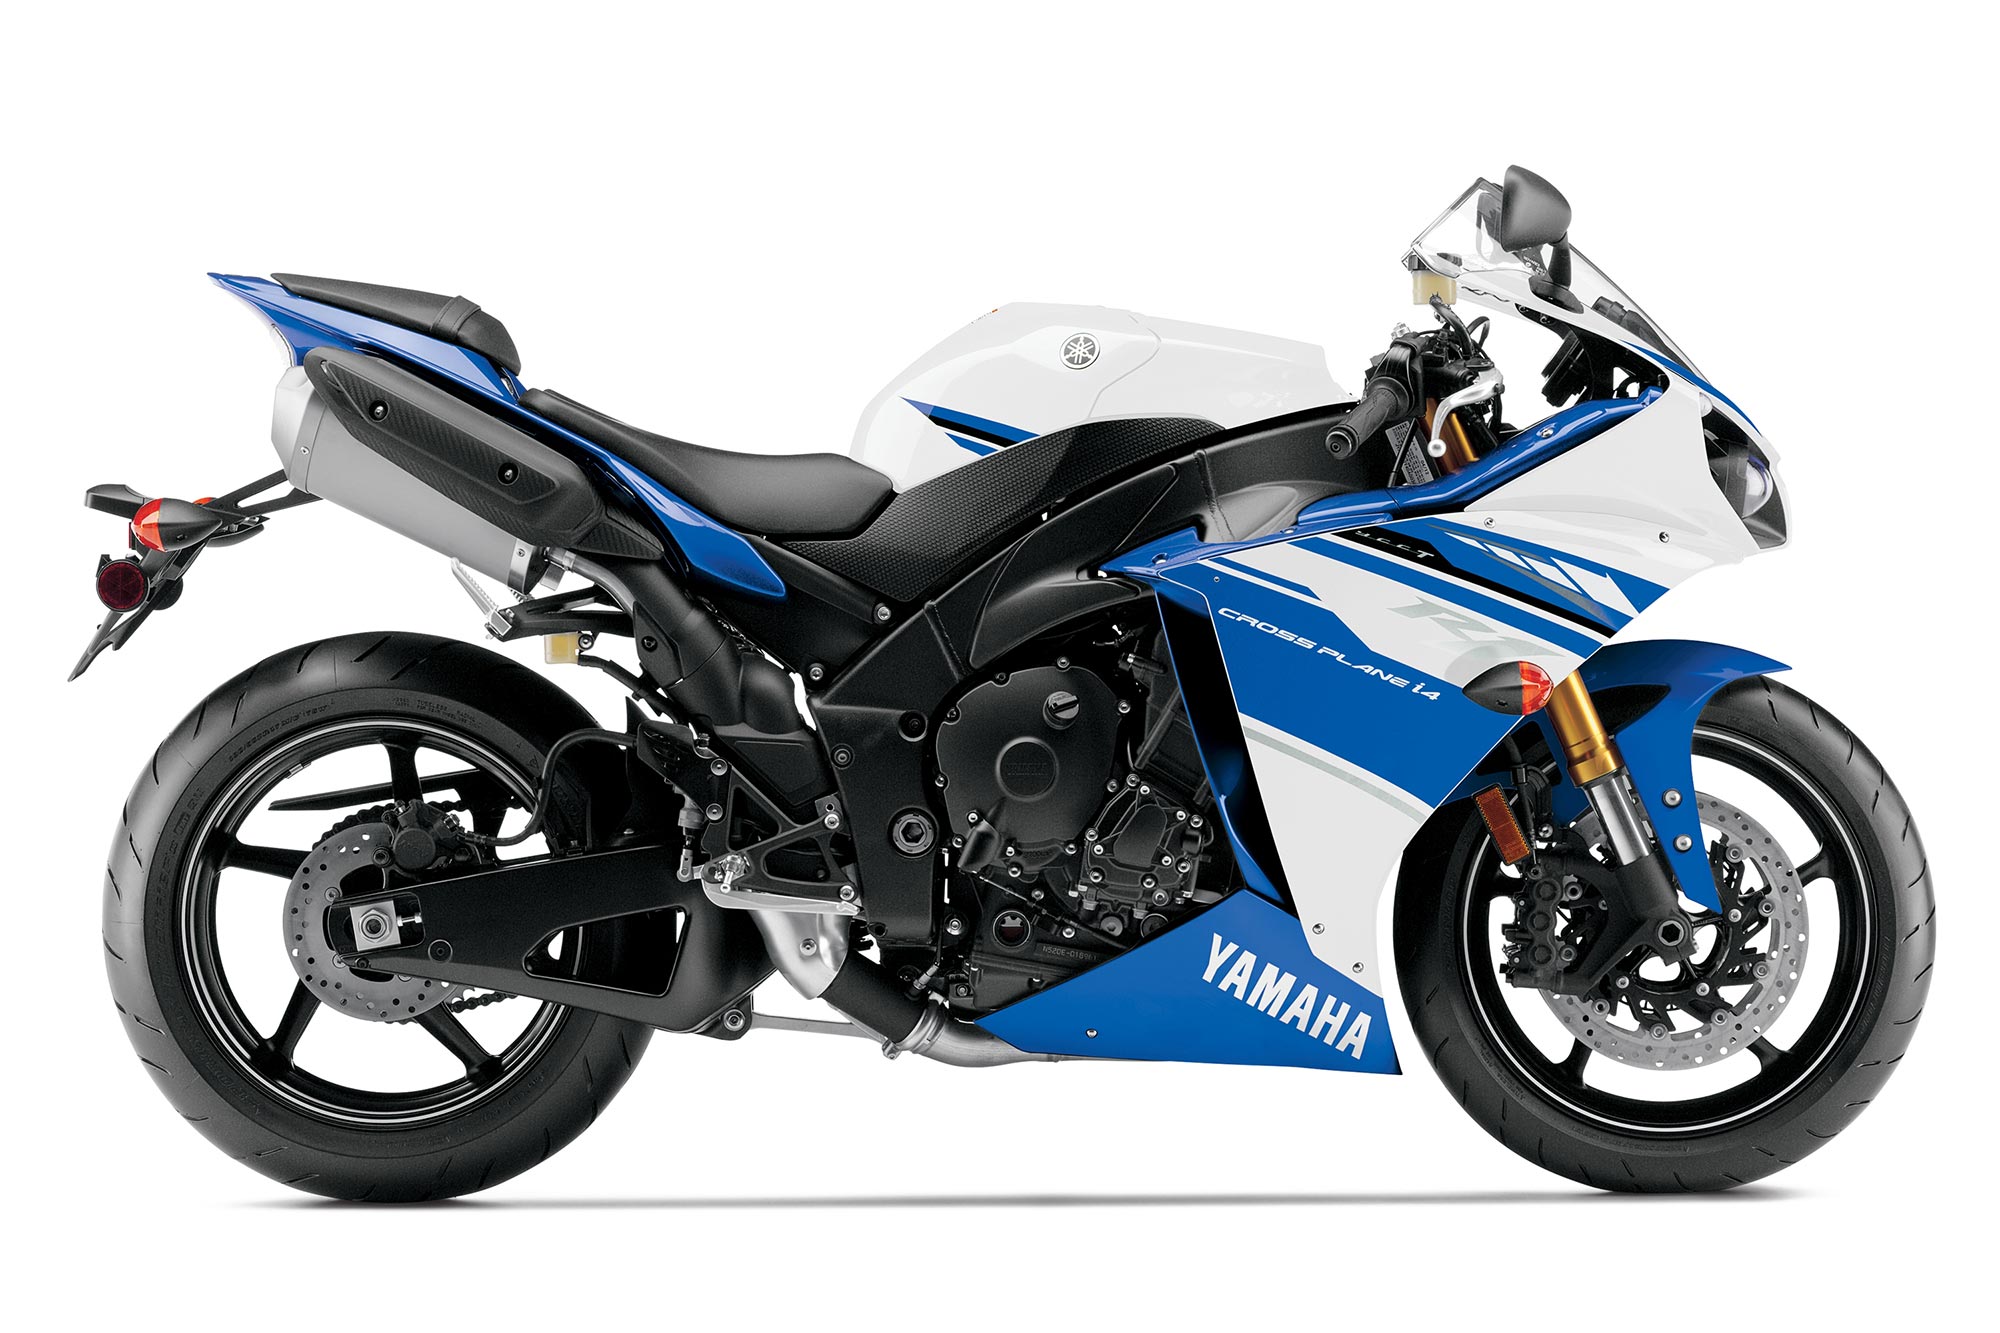 Yamaha Trademarks "R1S" & "R1M" at USPTO - "YZF-R1M" Trademarked Abroad